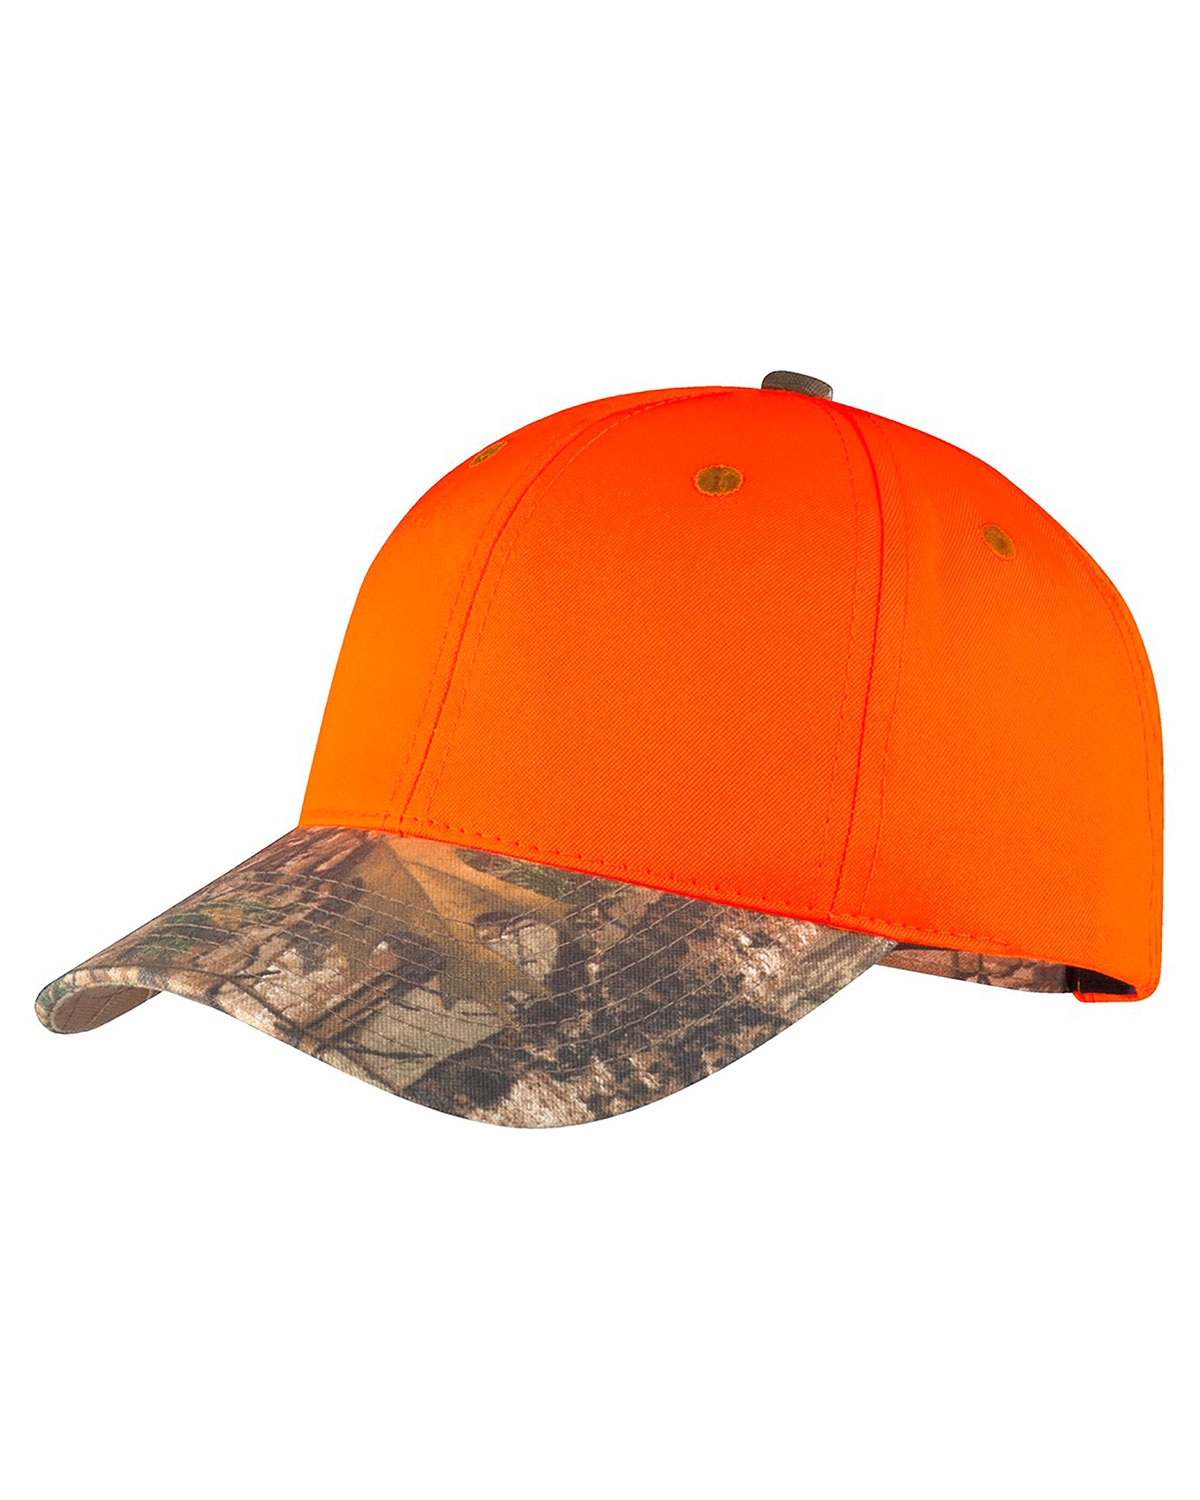 Port Authority C804 Unisex Safety Cap with Camo Brim at Apparelstation